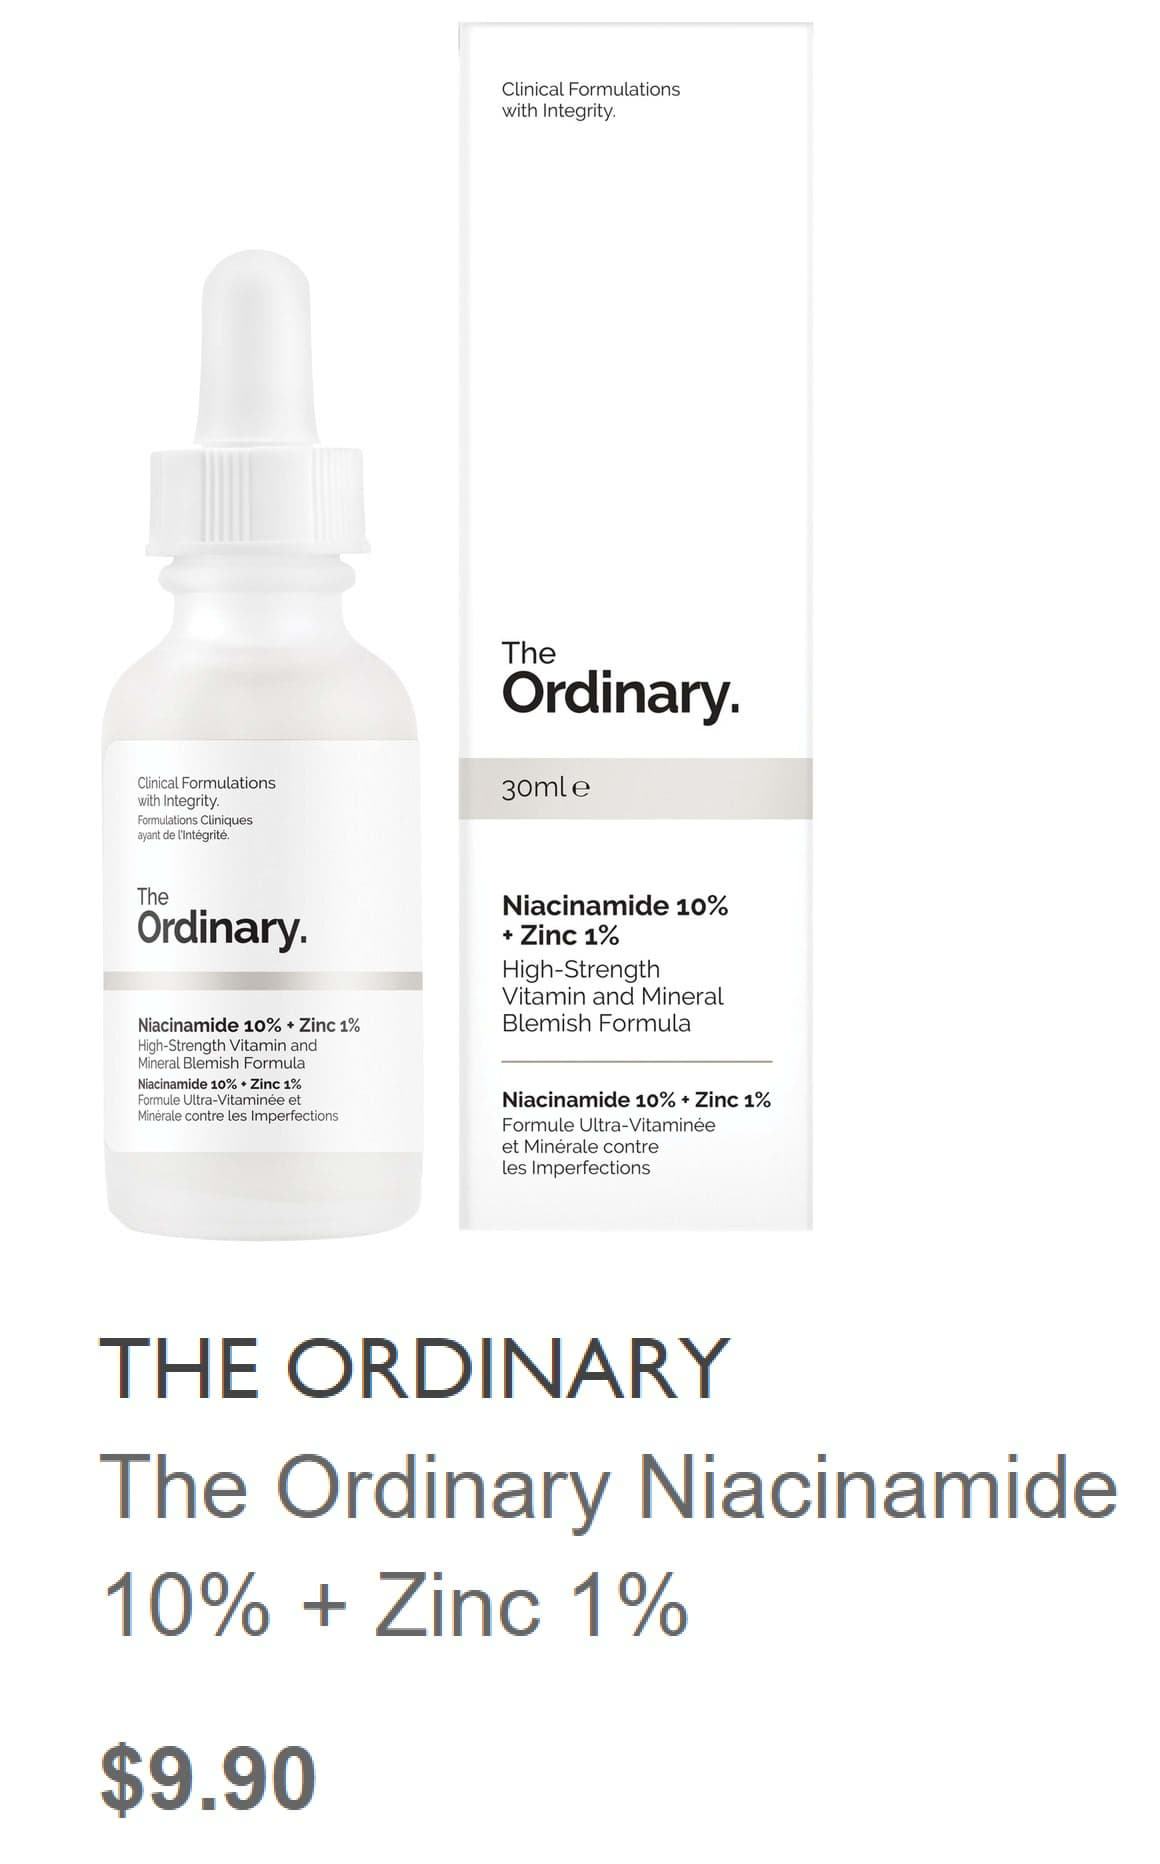 The Ordinary Niacinamide Serum: What you need to know